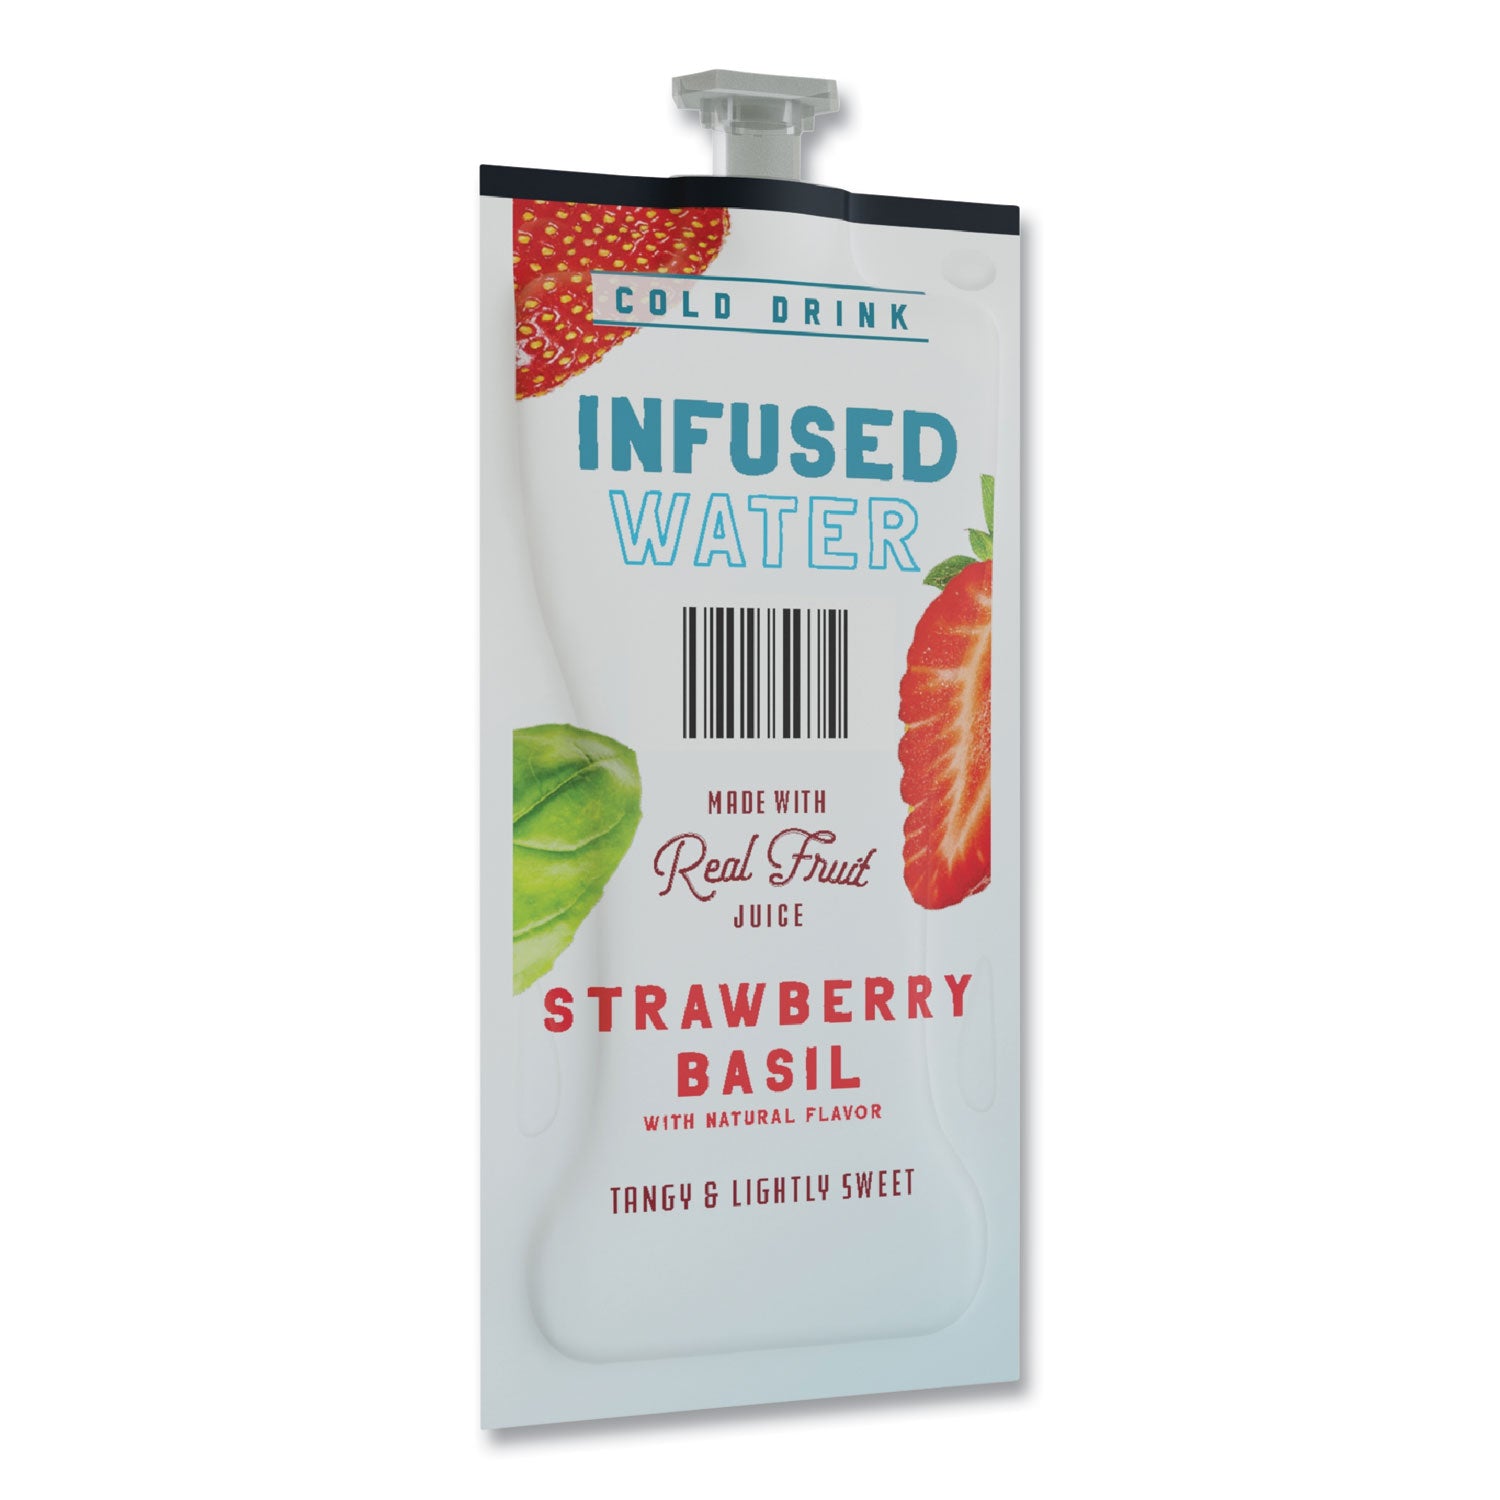 strawberry-basil-infused-water-freshpack-strawberry-basil-011-oz-pouch-100-carton_lav48053 - 2